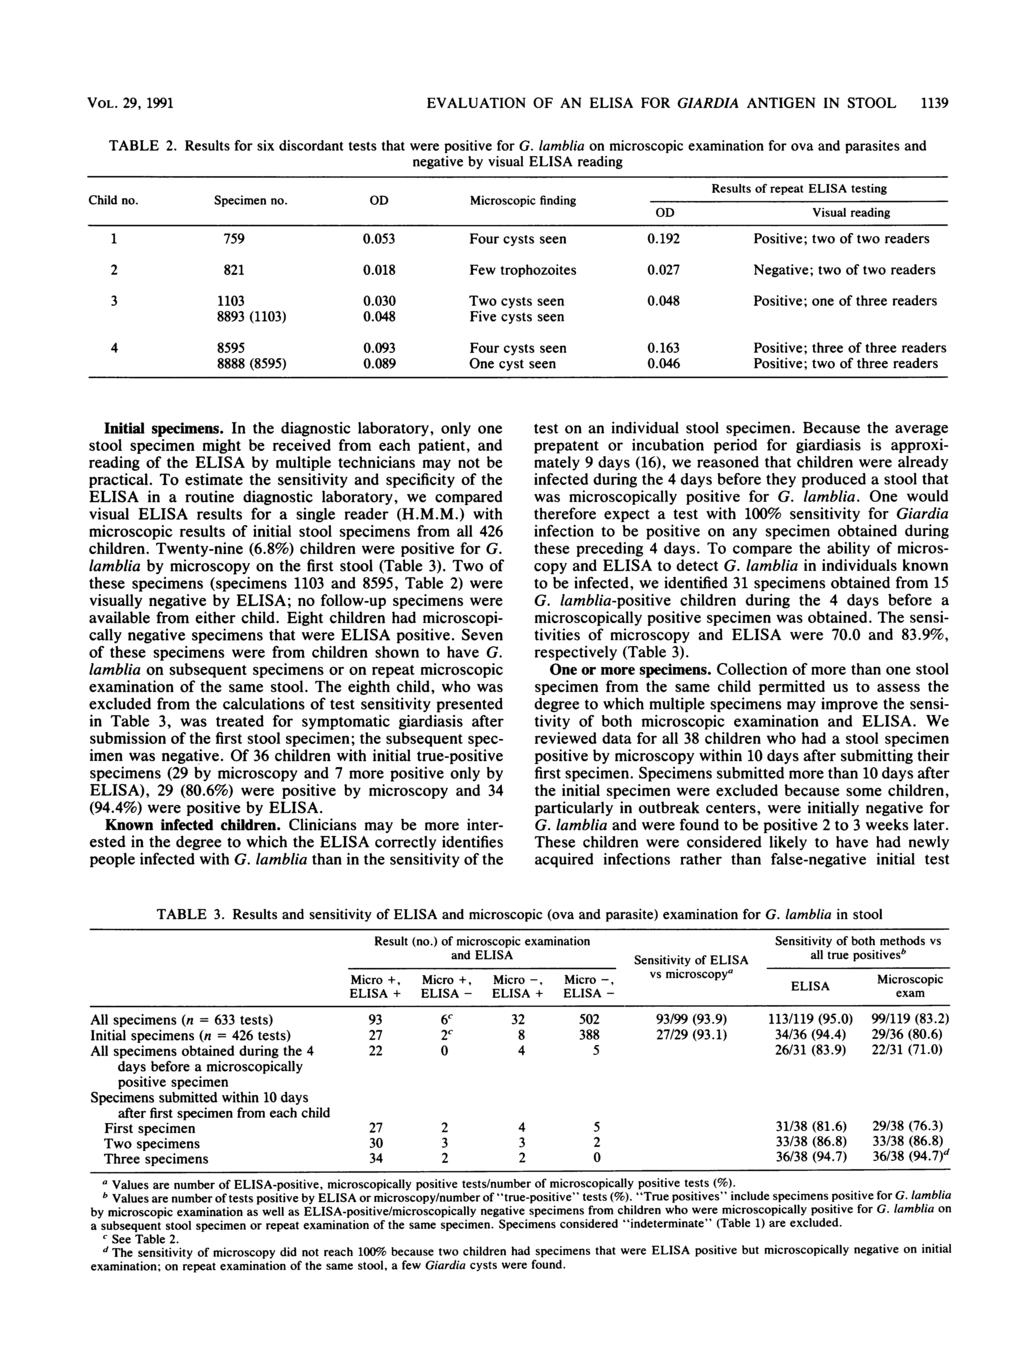 VOL. 29, 1991 EVALUATION OF AN ELISA FOR GIARDIA ANTIGEN IN STOOL 1139 TABLE 2. Results for six discordant tests that were positive for G.